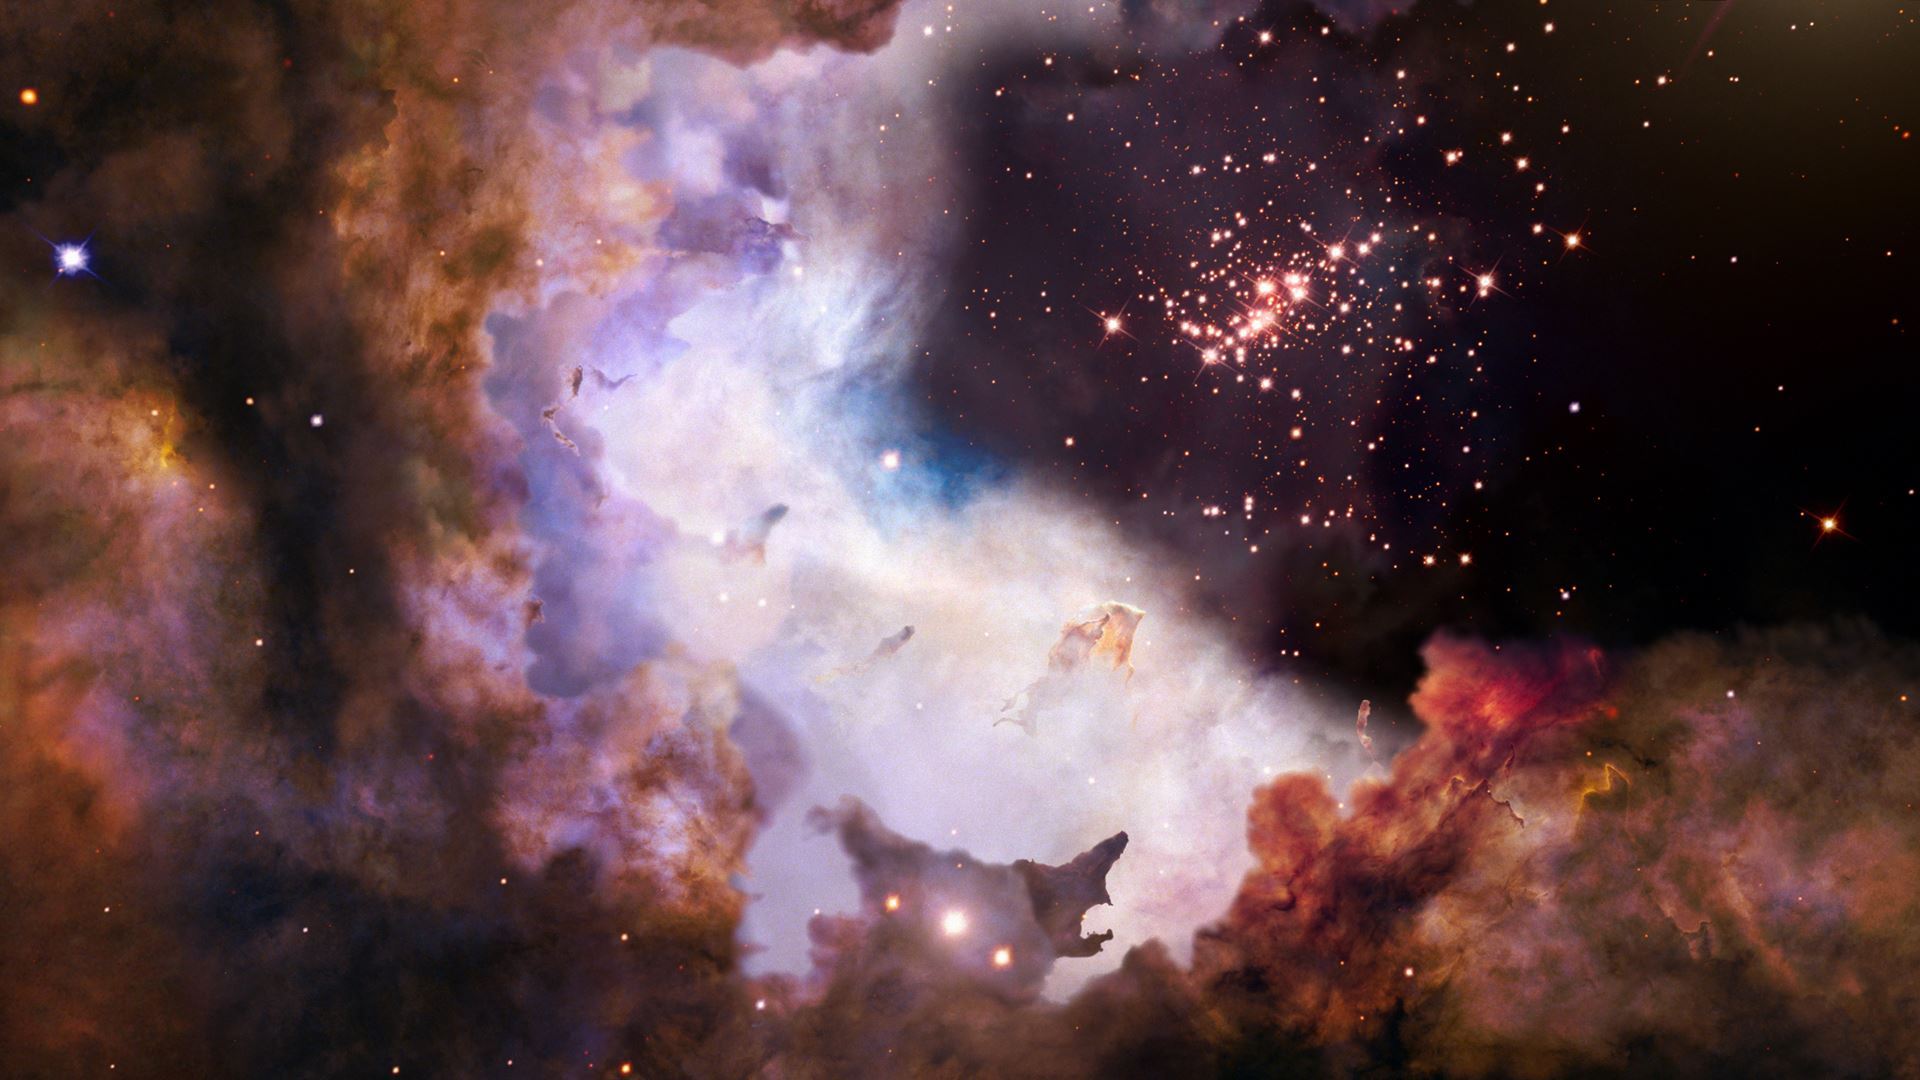 A cosmic image of the universe that features a cluster of stars like the Milky Way